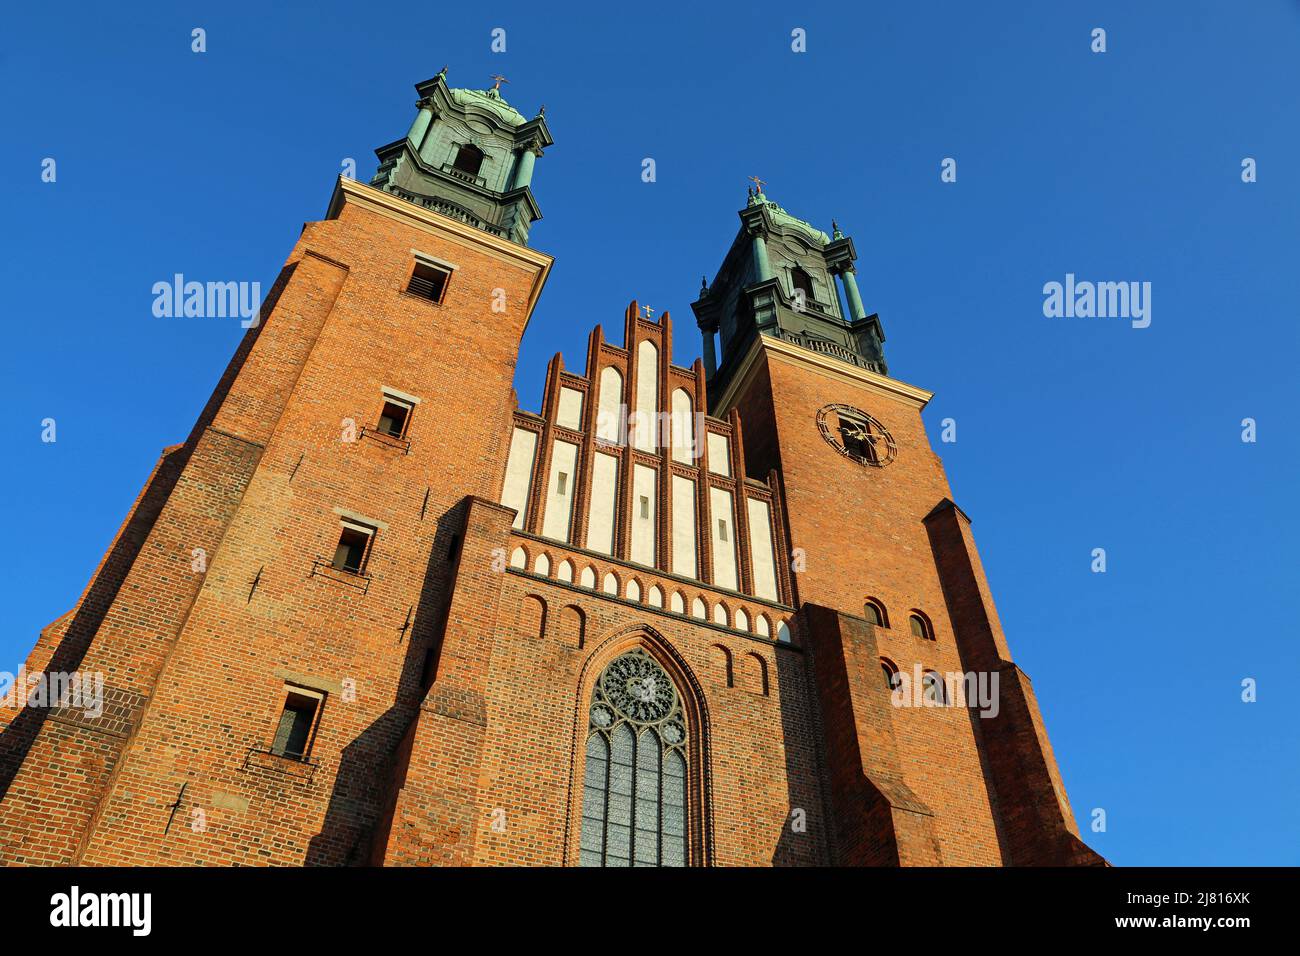 The Archcathedral of St Peter and St Paul - Poznan, Poland Stock Photo